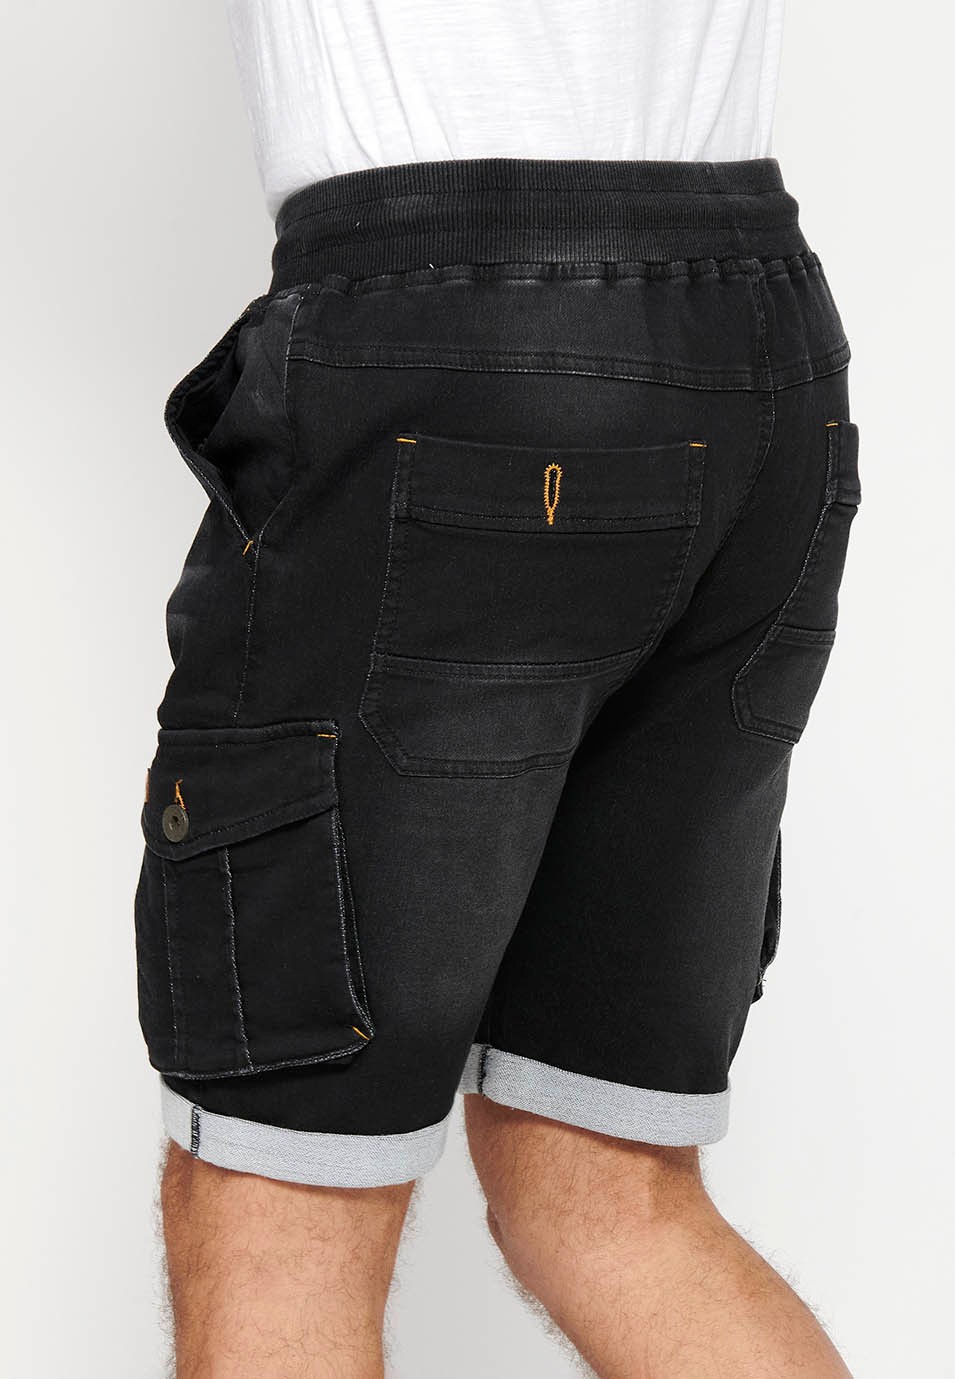 Denim Bermuda cargo jogger shorts finished with a turn-up, Adjustable waist with elastic and drawstring, Side pockets with flap, Black for Men 8